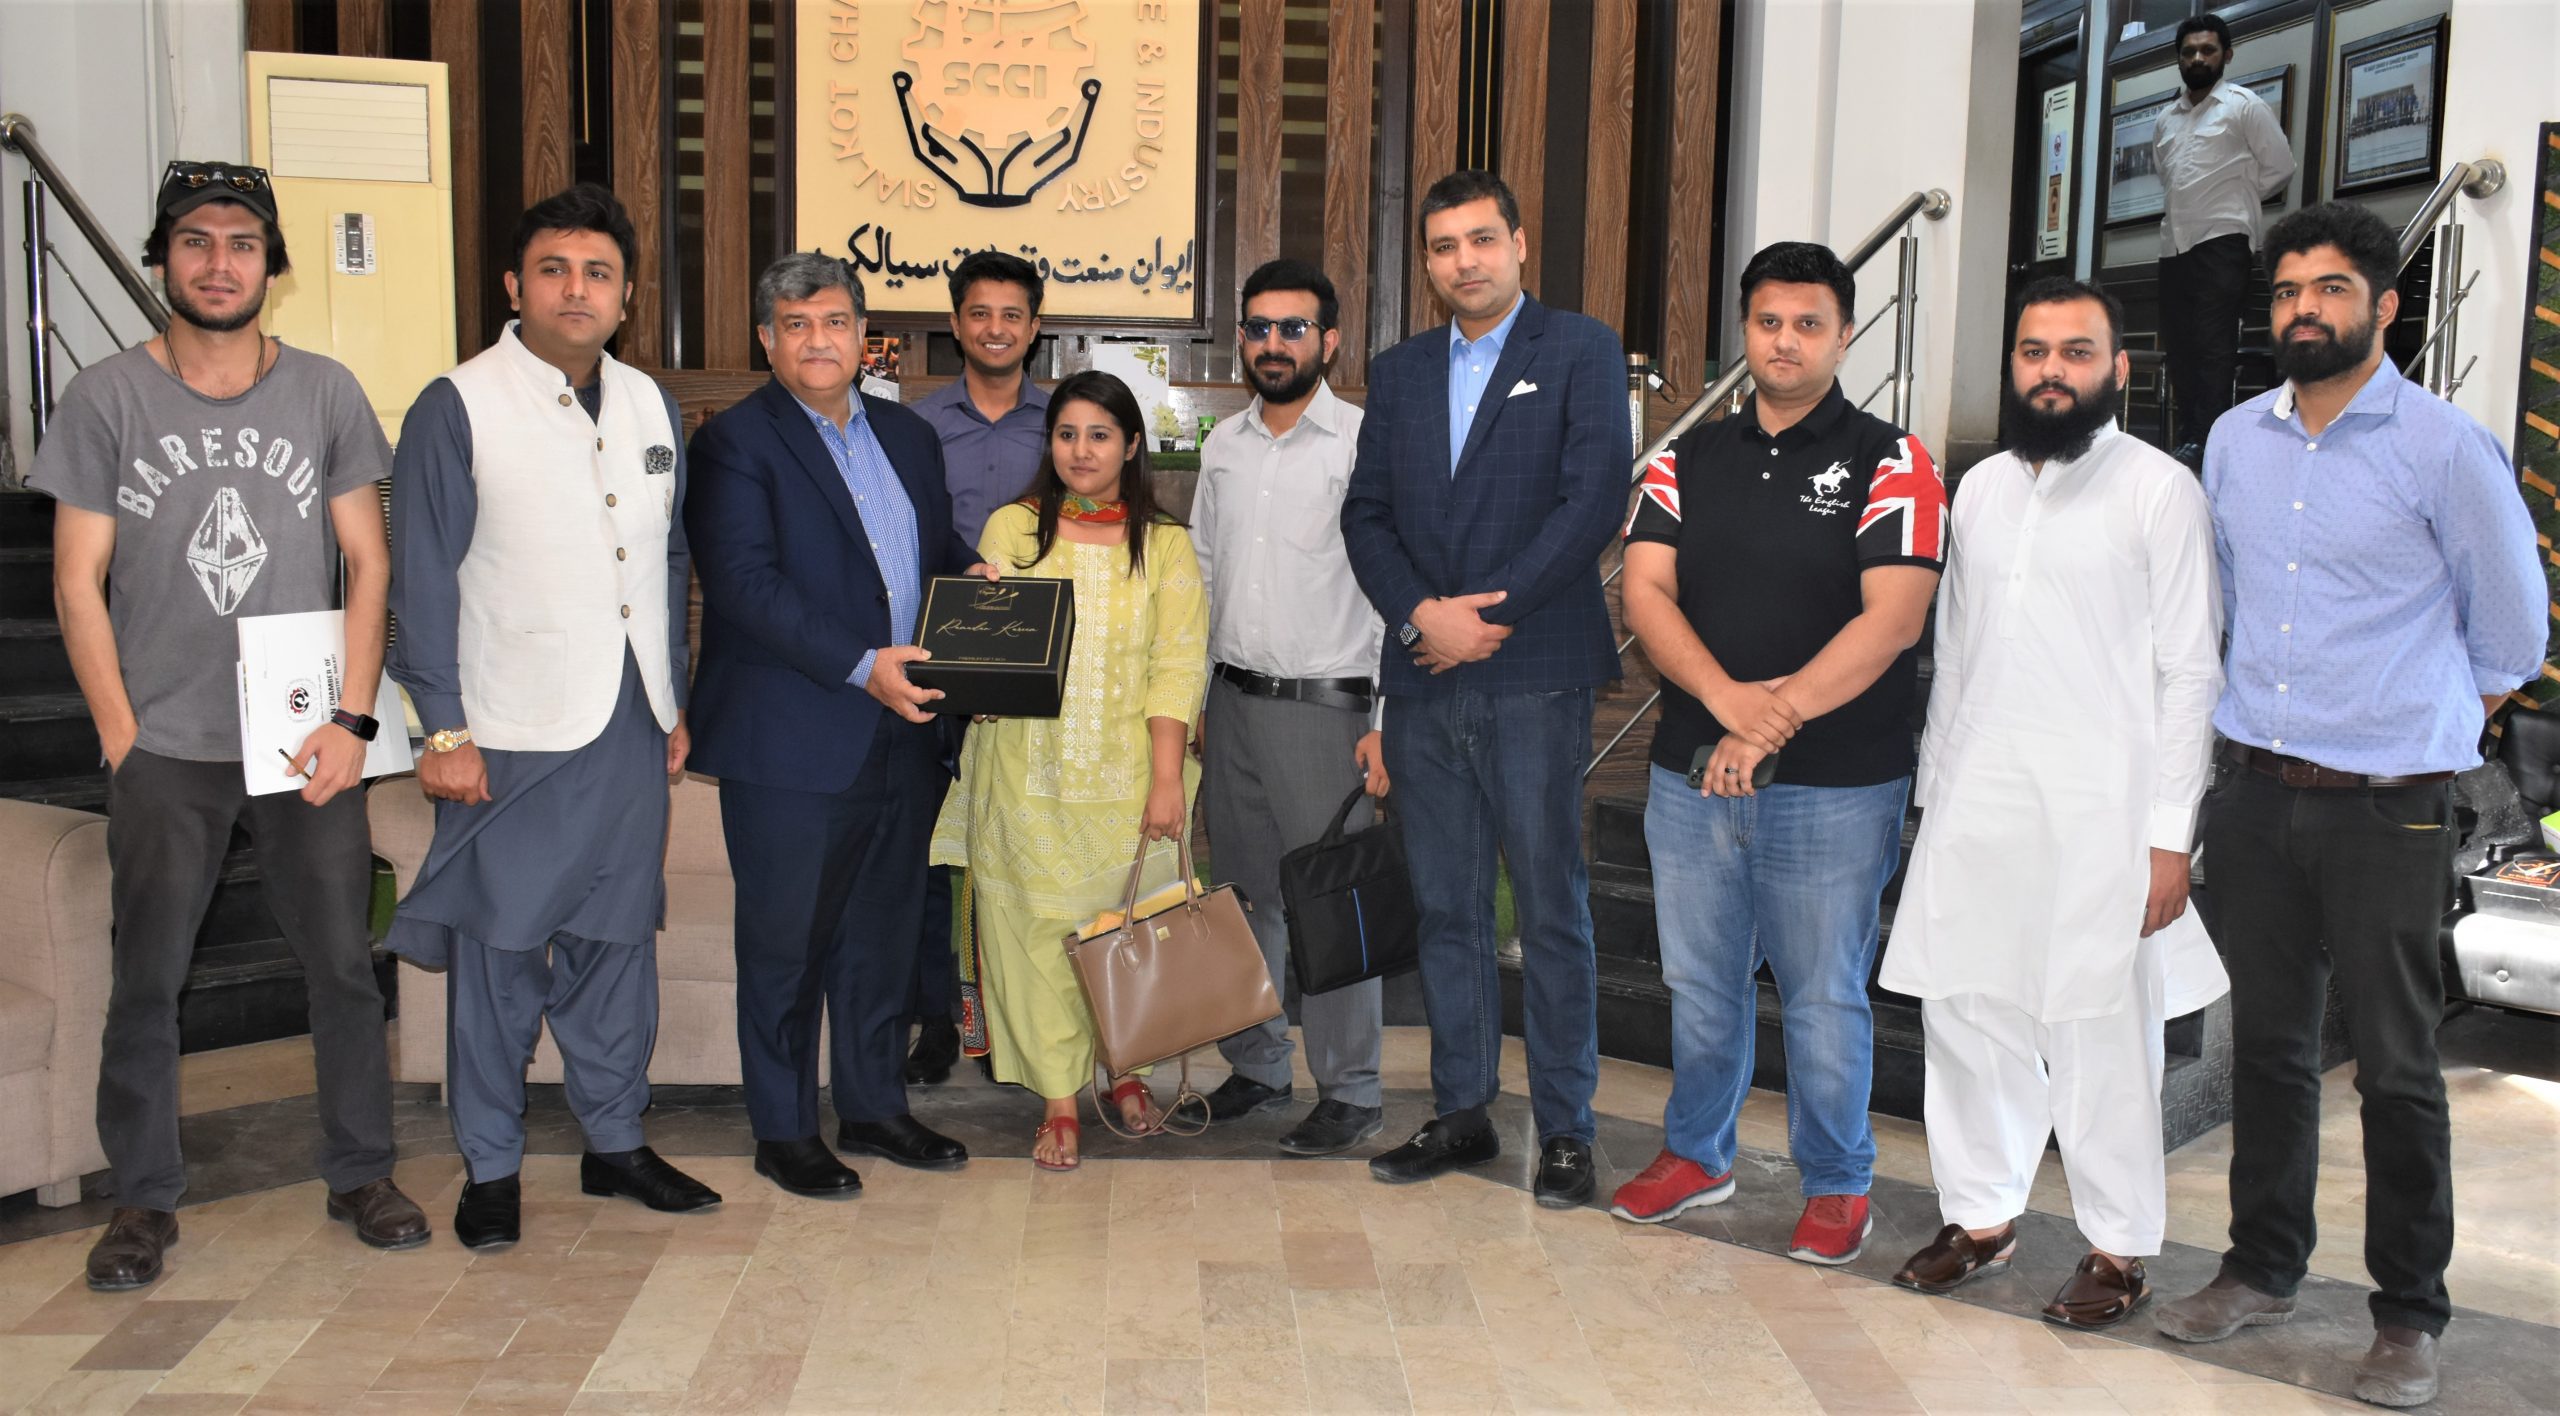 Mian Imran Akbar, President Sialkot Chamber of Commerce & Industry in a meeting with the delegation of Truly Organic Pakistan on April 19, 2022. Sheikh Zohaib Raffique Sethi, Senior Vice President and Mr. Qasim Malik, Vice President Sialkot Chamber also attended the meeting.